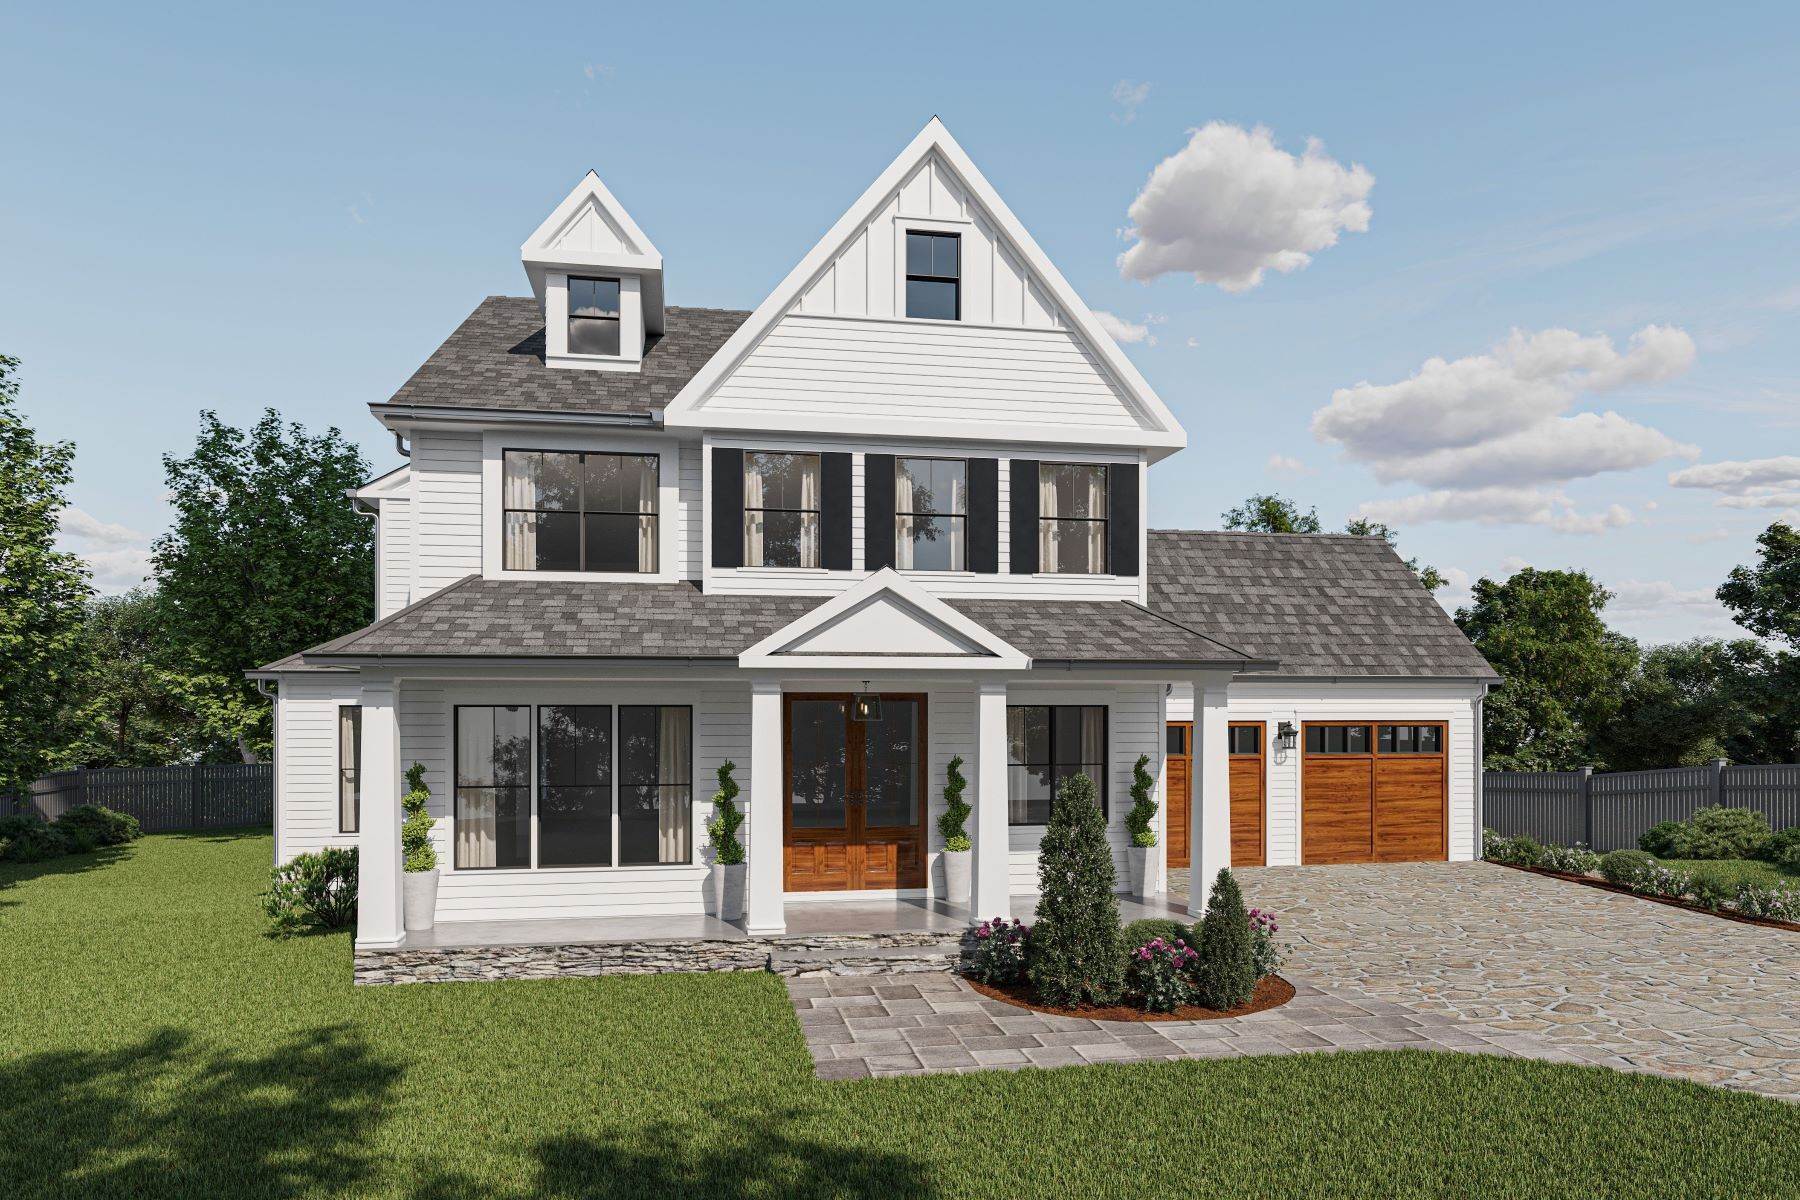 Property for Sale at New Construction in Princeton’s Coveted Western Section 186 Elm Road Princeton, New Jersey 08540 United States